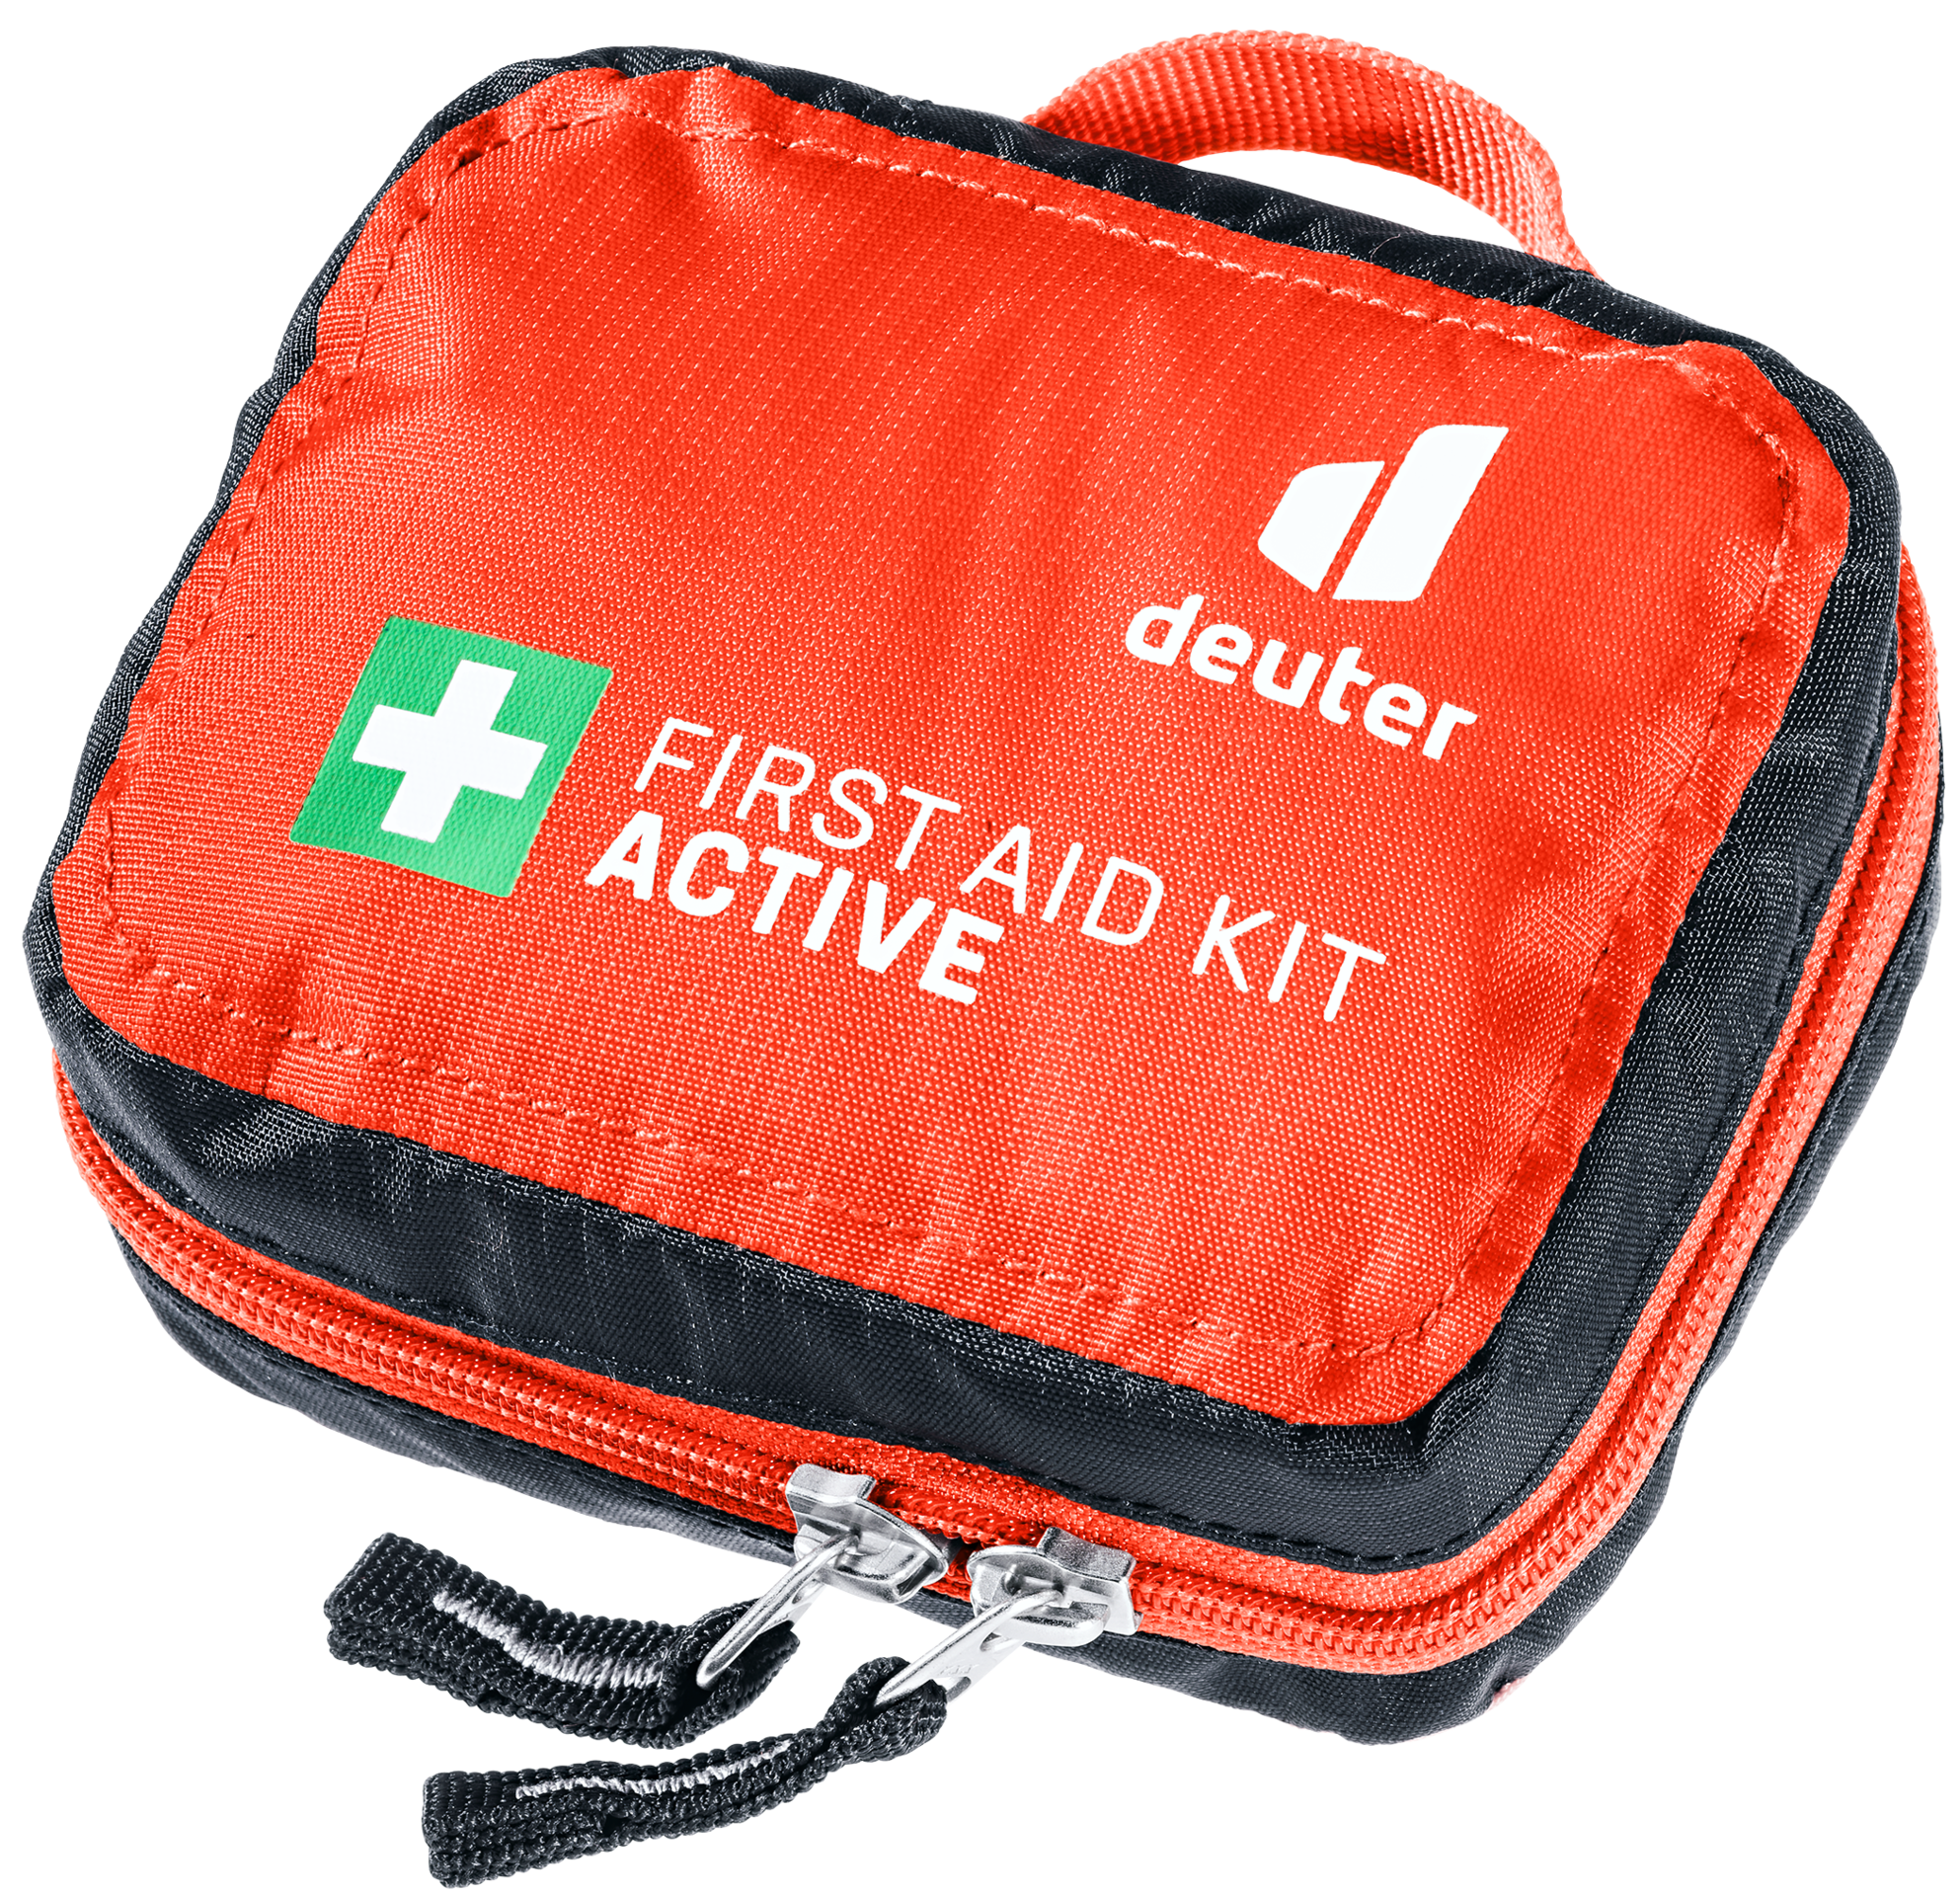 https://dk0fkjygbn9vu.cloudfront.net/cache-buster-11708470493/deuter/mediaroom/product-images/accessories/first-aid-kits/140331/image-thumb__140331__deuter_lightbox-img/3970023-9002-FirstAidKitActive_papaya-D-00.png